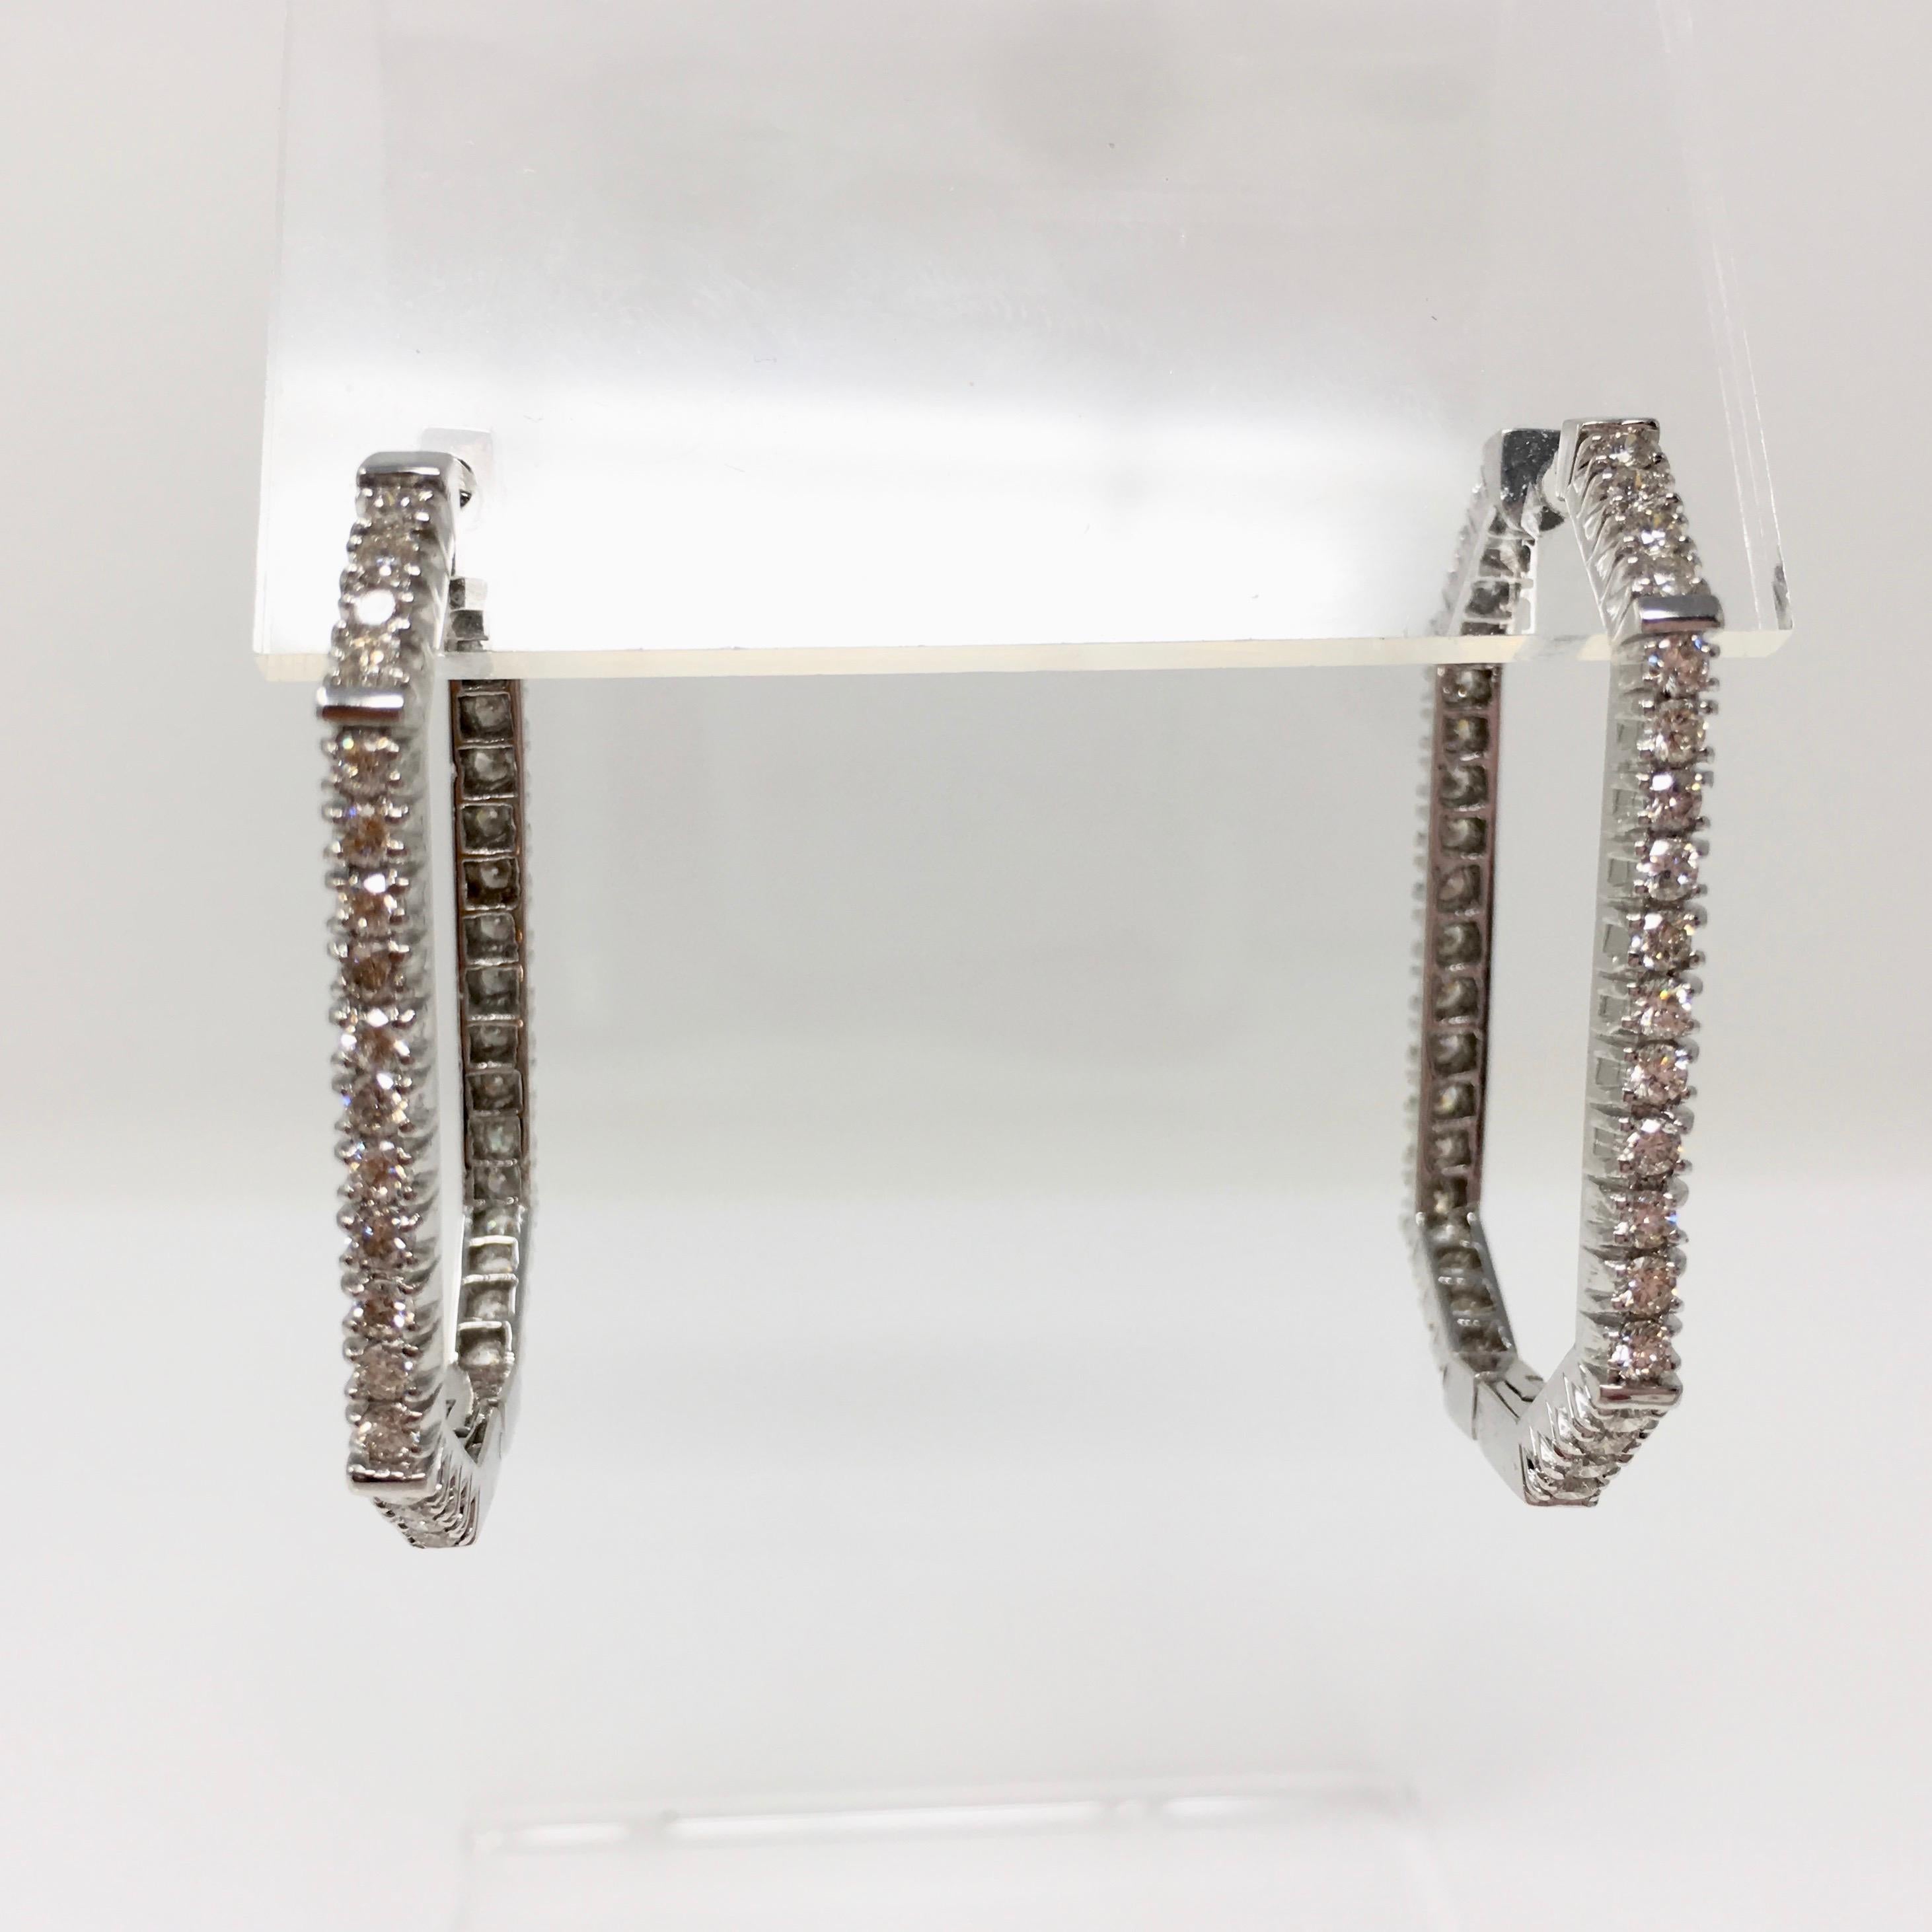 These highly fashionable earrings are perfect for evening or day wear. These are beautifully handmade by Moguldiam Inc in 18K white gold with diamonds weighing 1.95 carat with VS clarity and GH color creating an incredible sparkle. These hoop